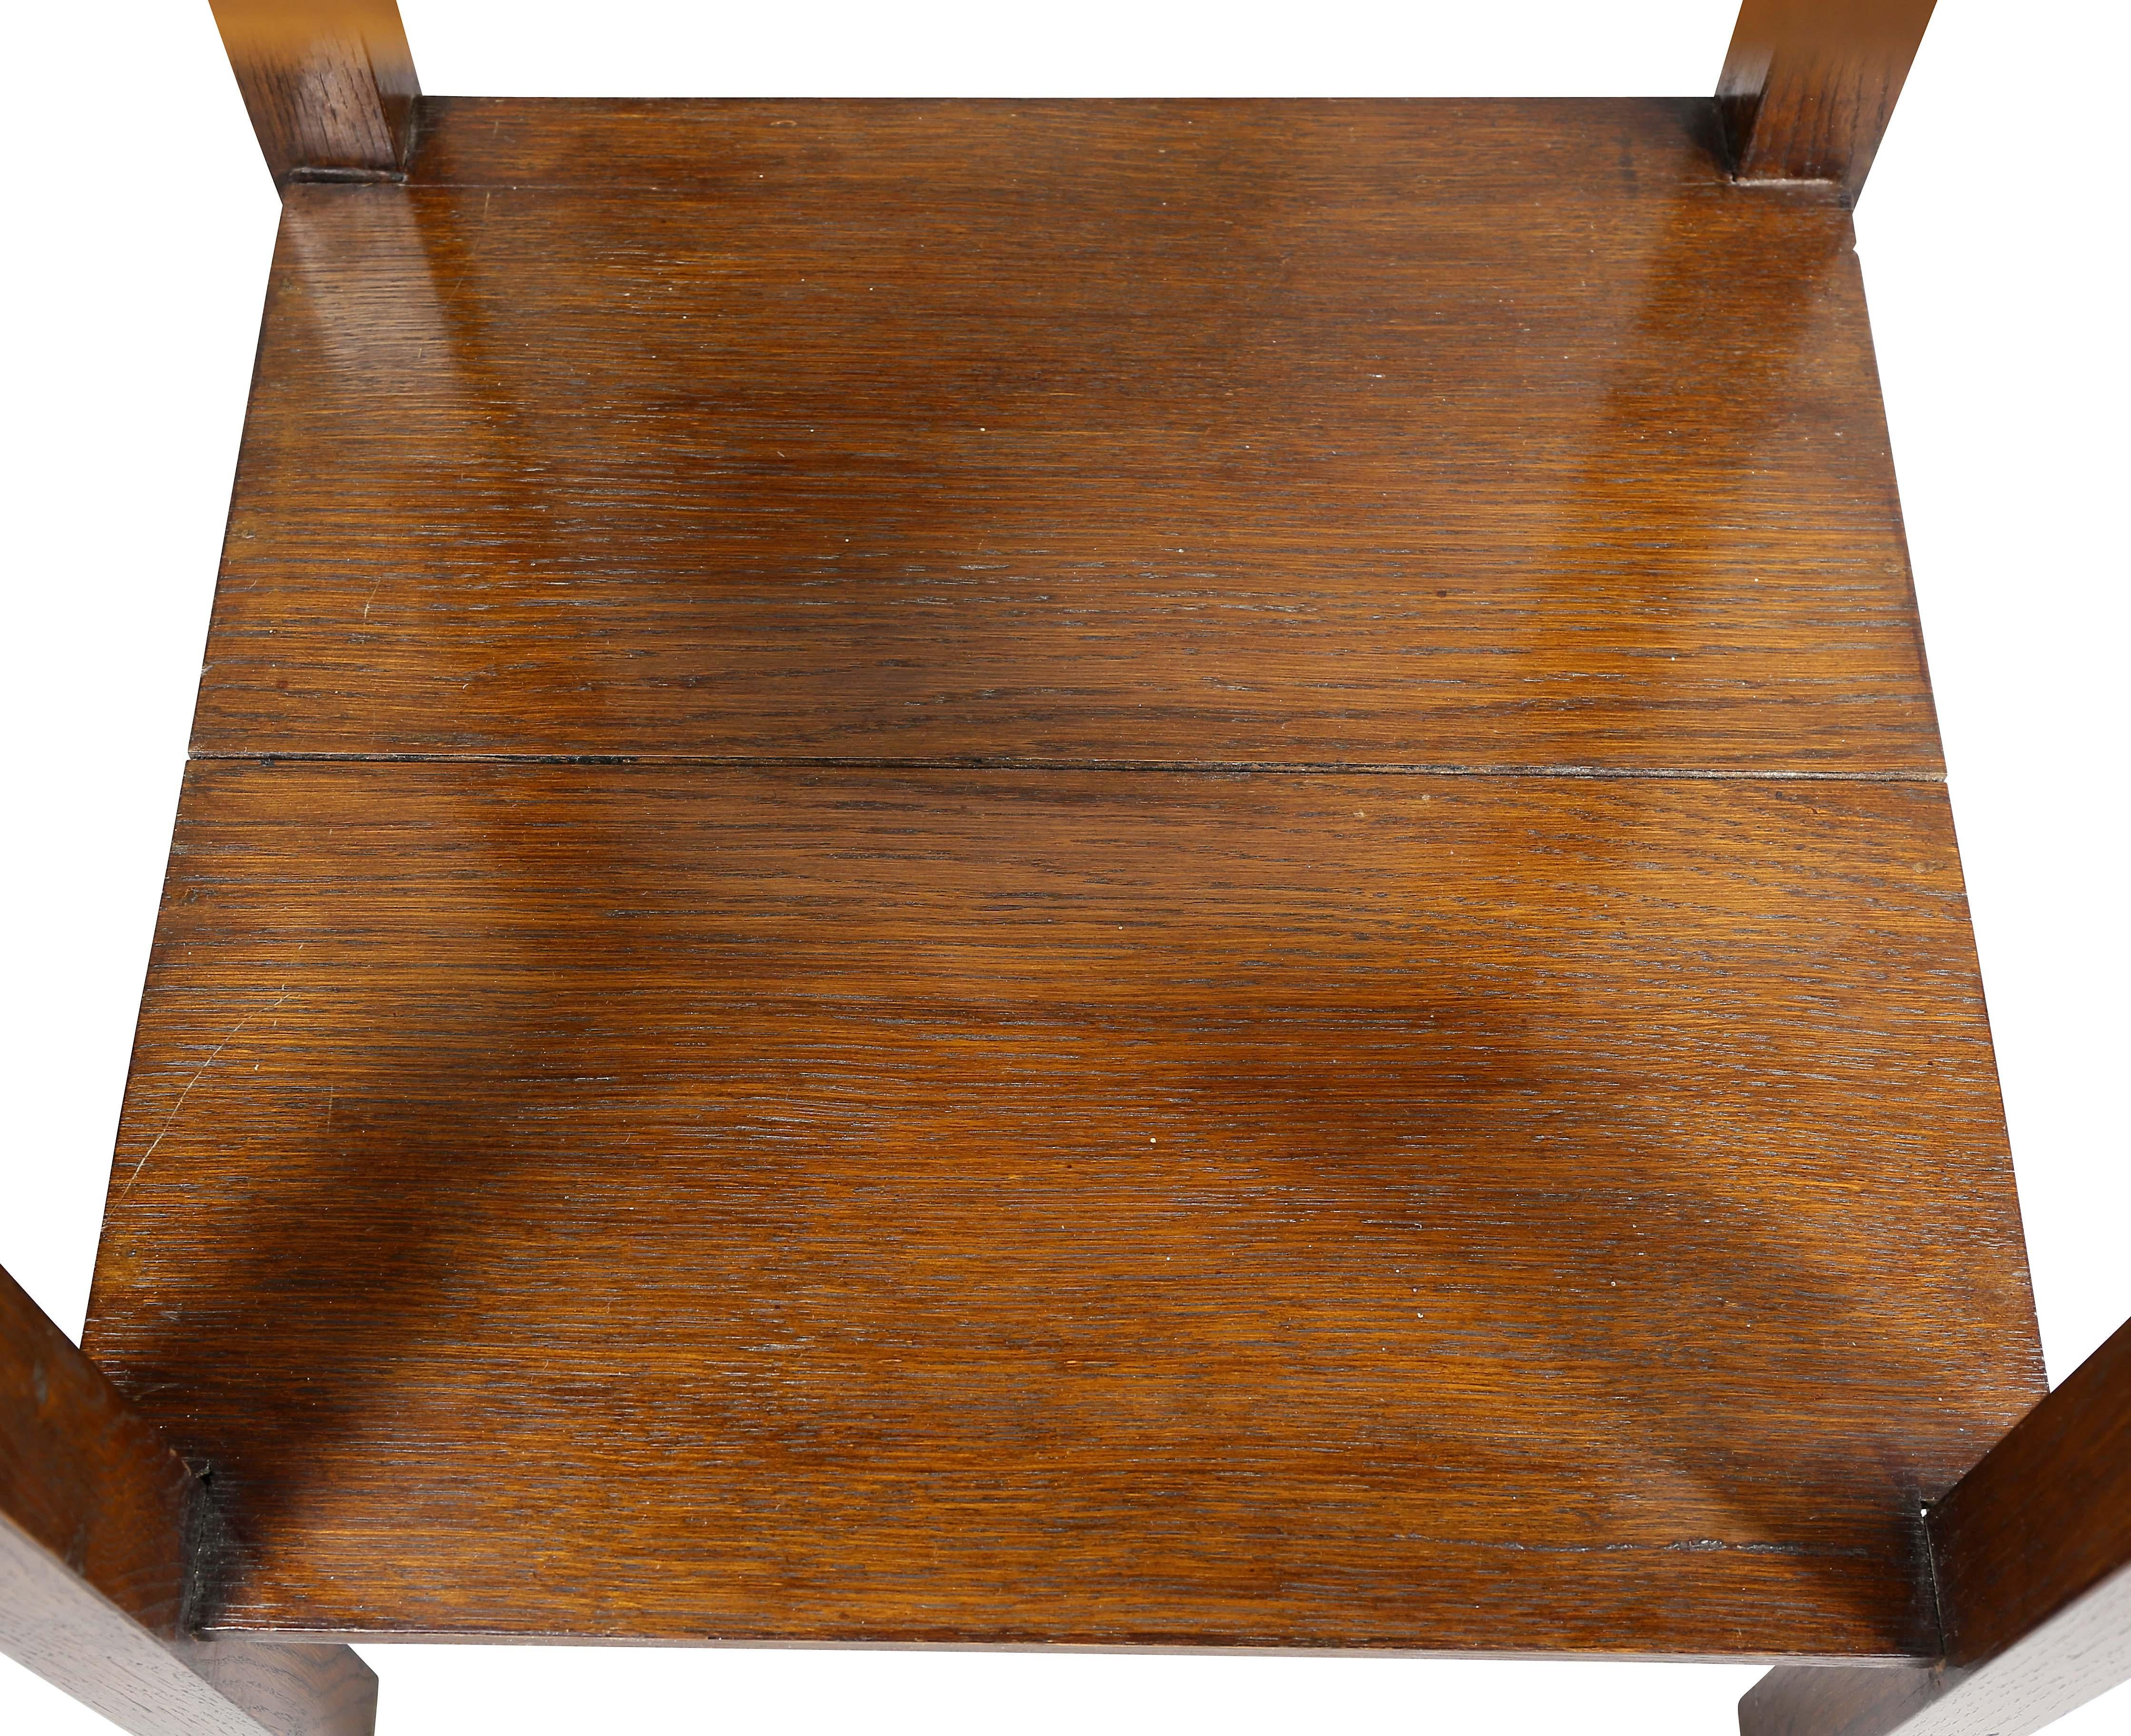 English Arts and Crafts Oak End Table (Englisch)